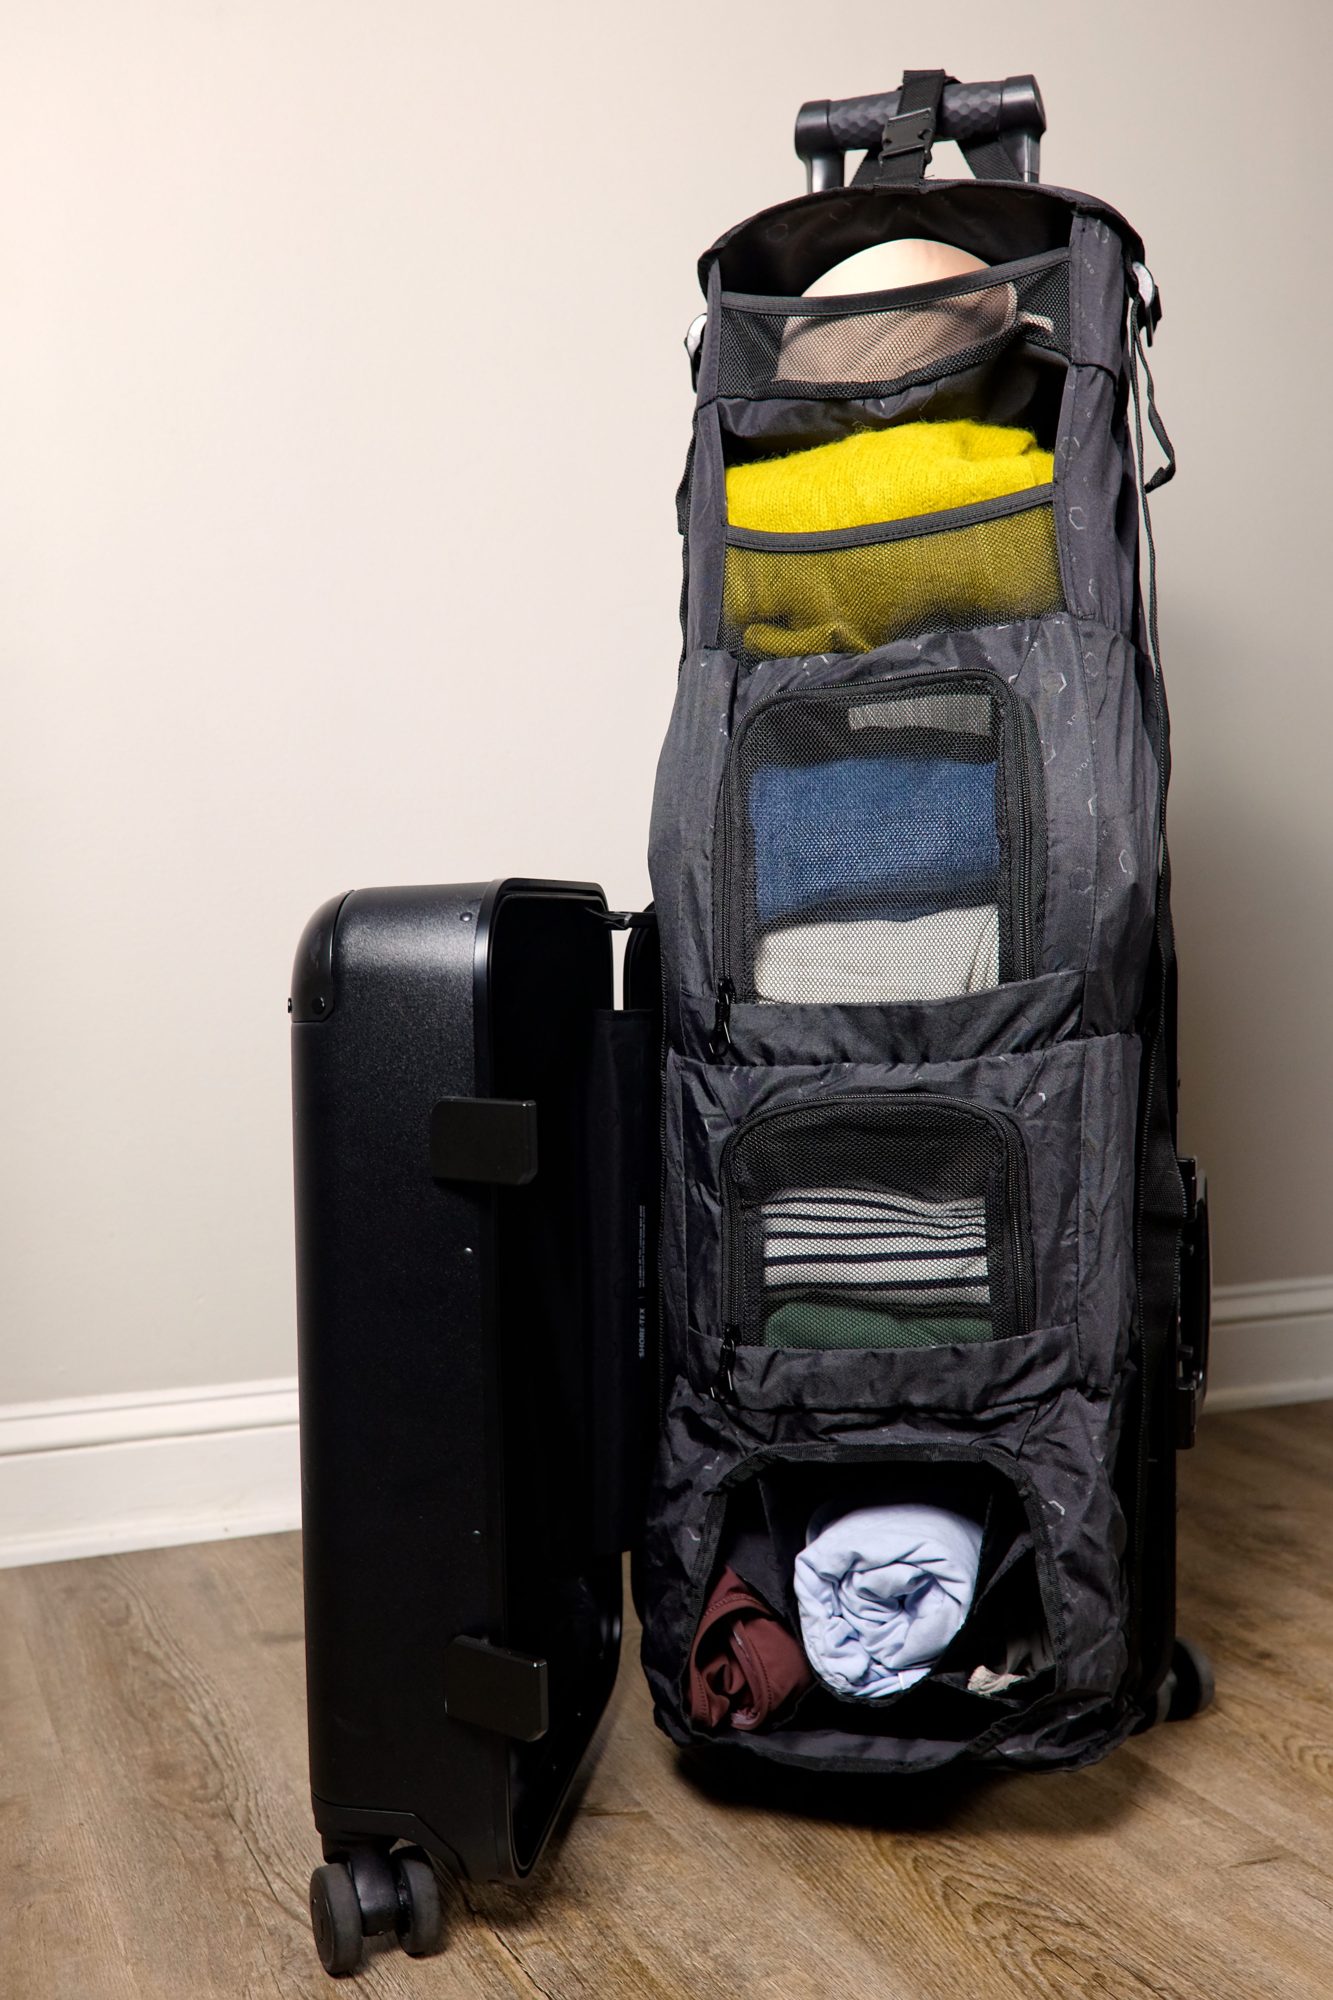 A Travel Blogger's Review of the Solgaard Carry-On Closet